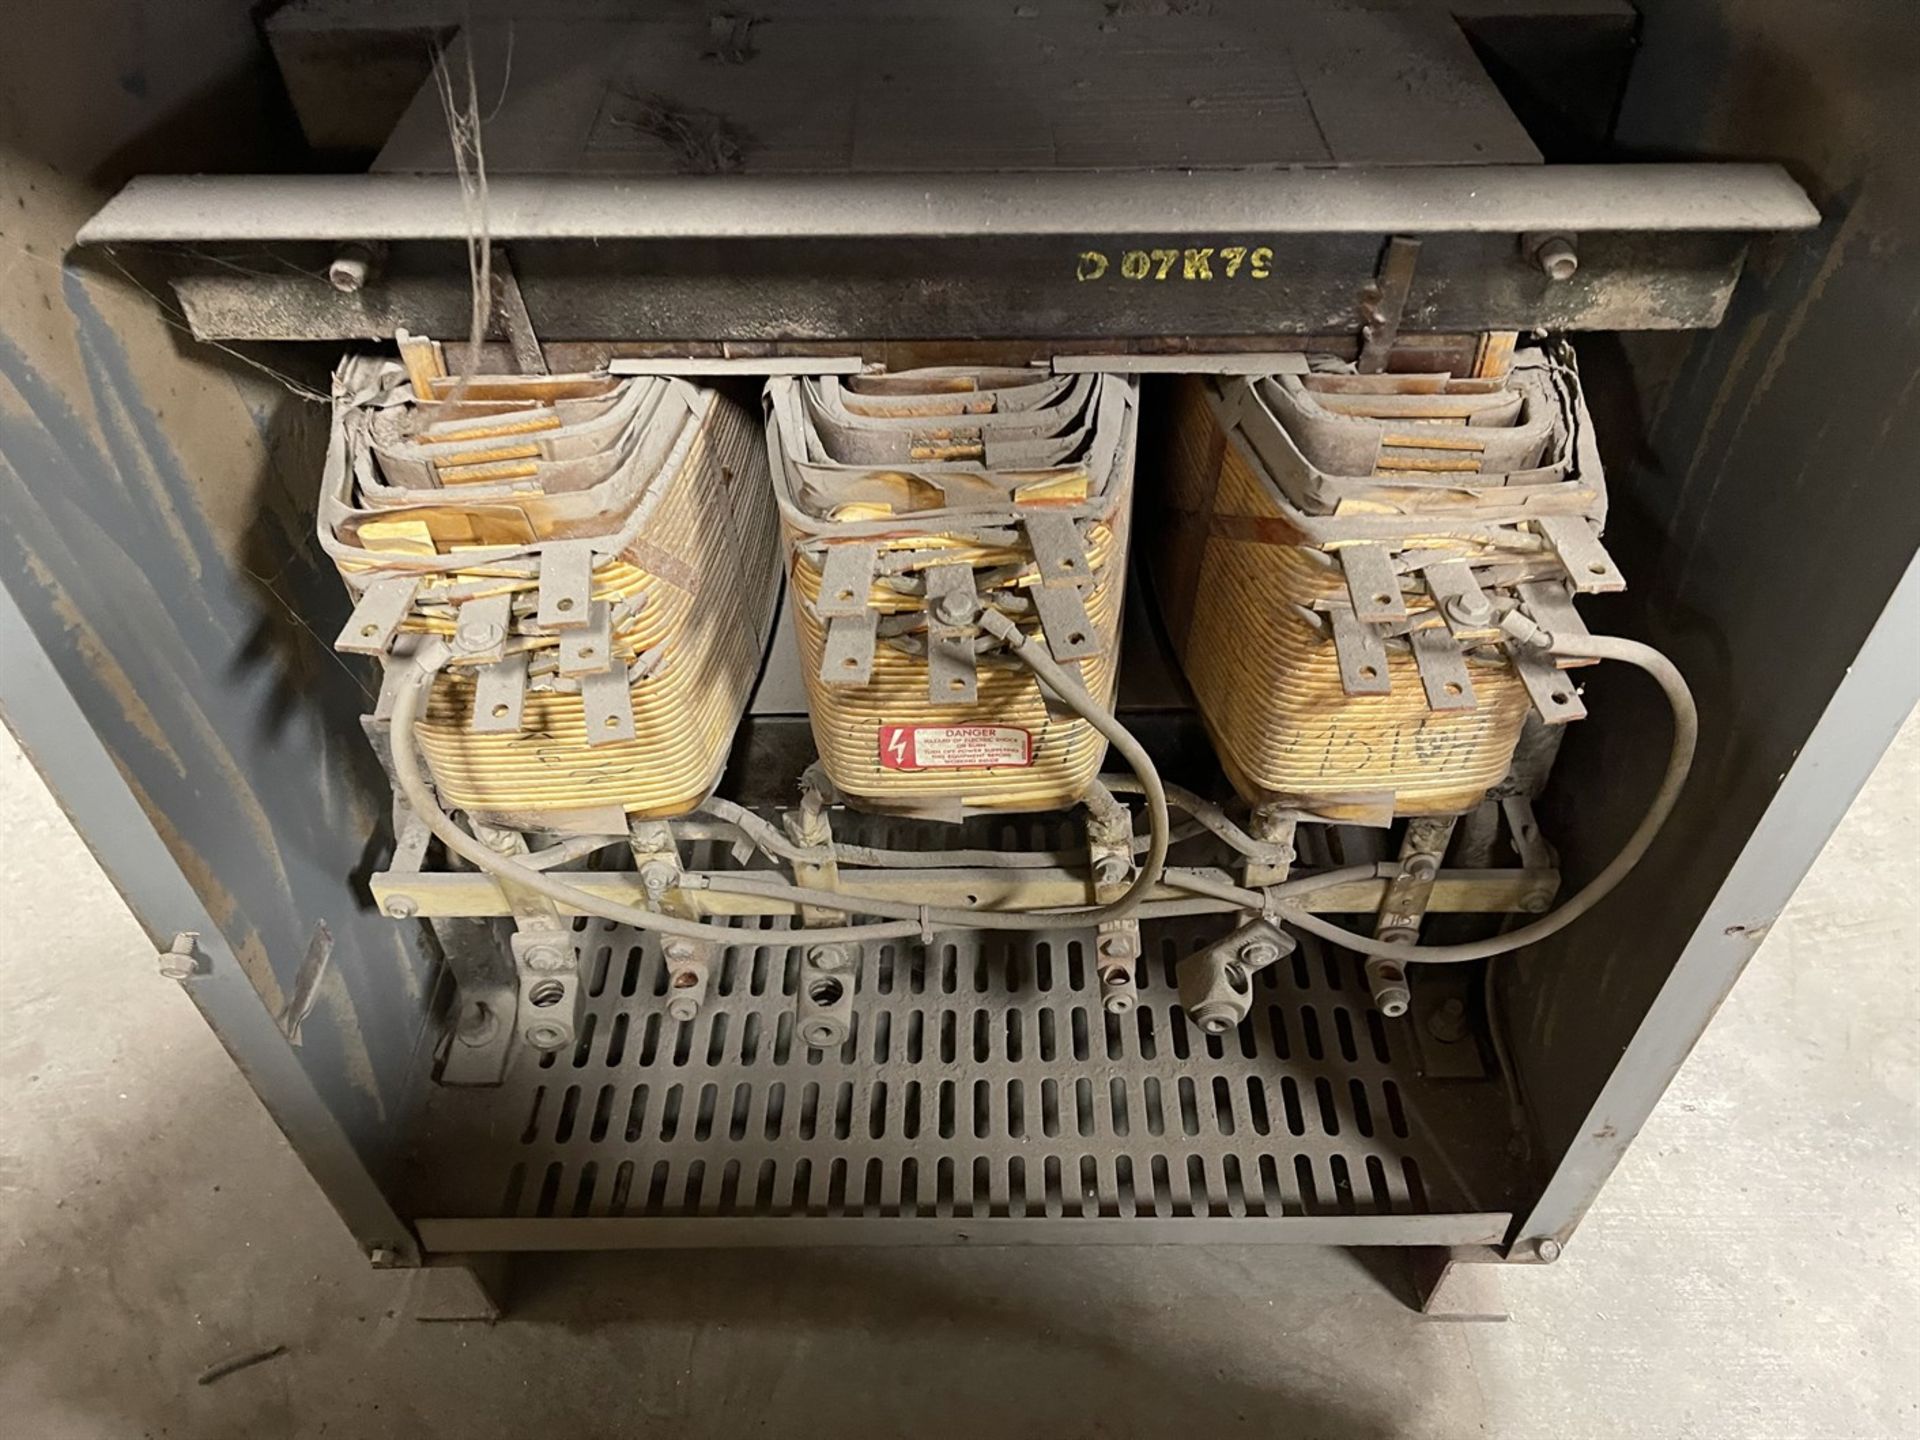 Square D 75 KVA Transformer (Condition Unknown) - Image 2 of 3